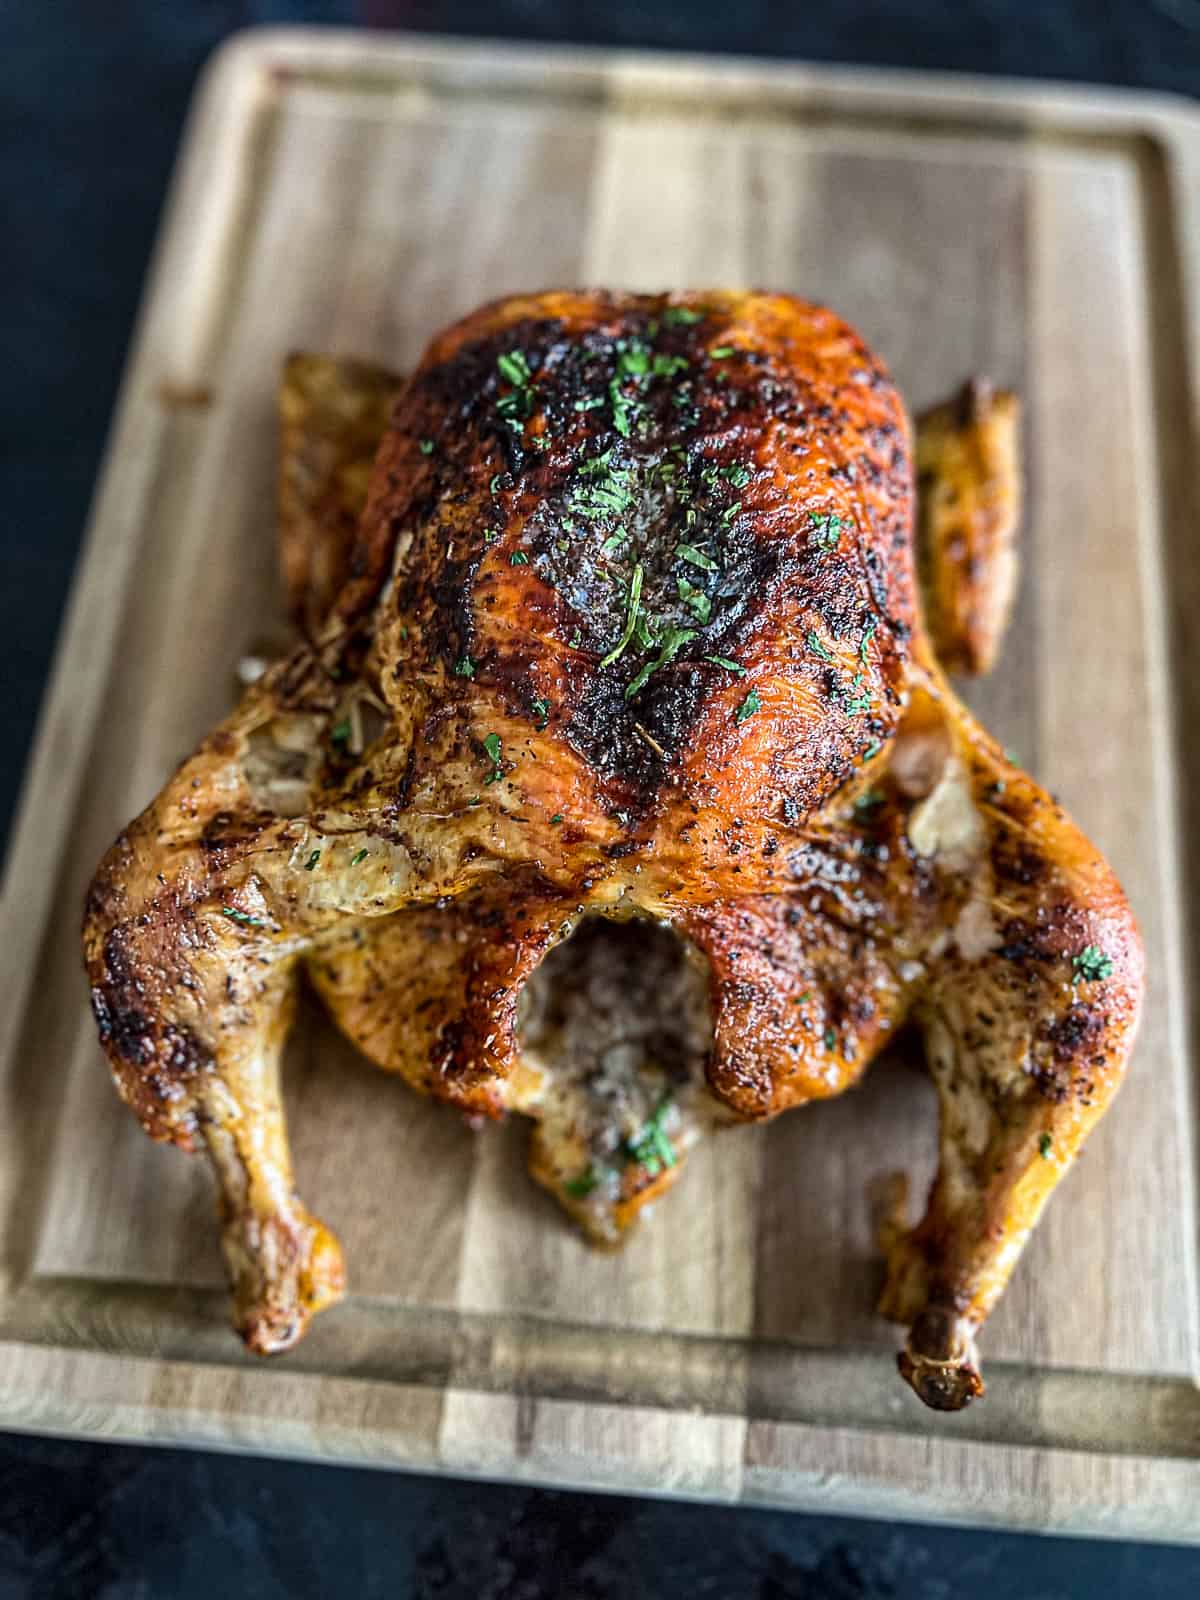 Roasted Chicken resting on a butcher block